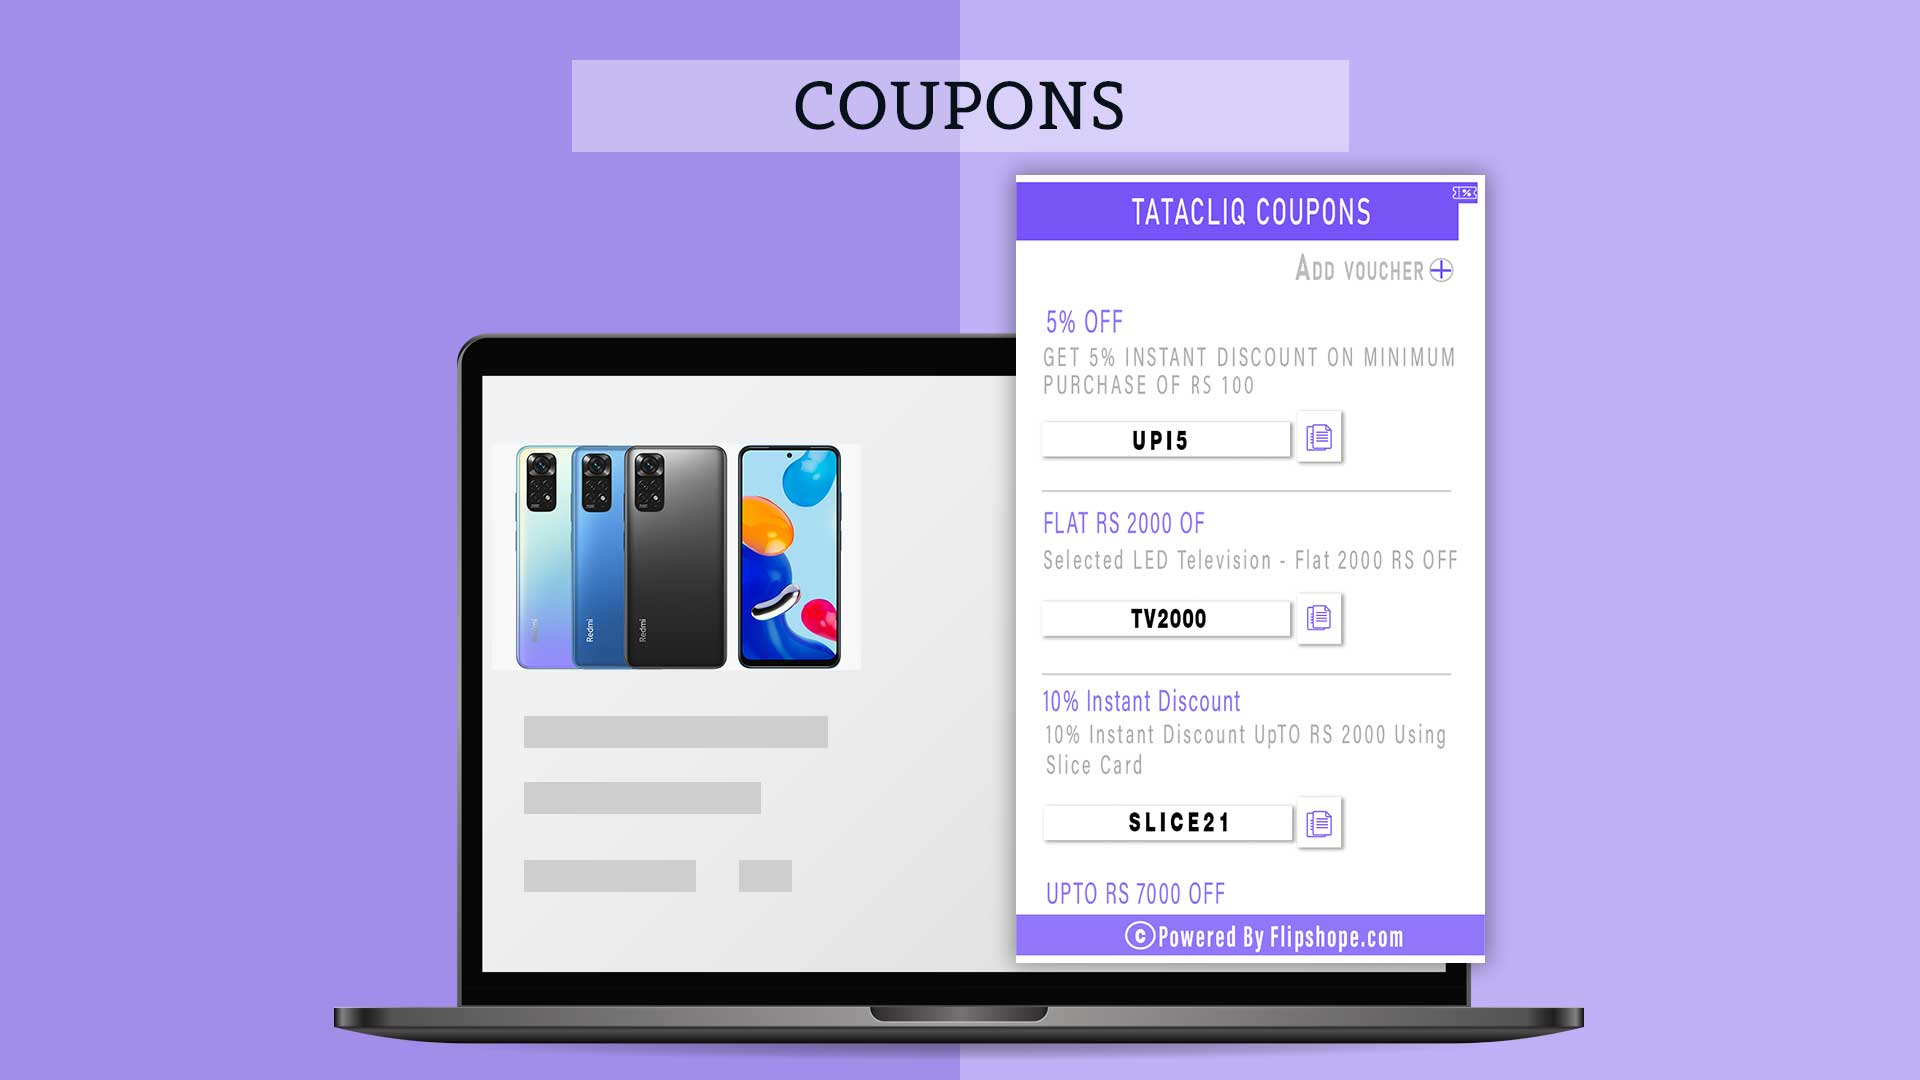 Flipshope feature Coupons